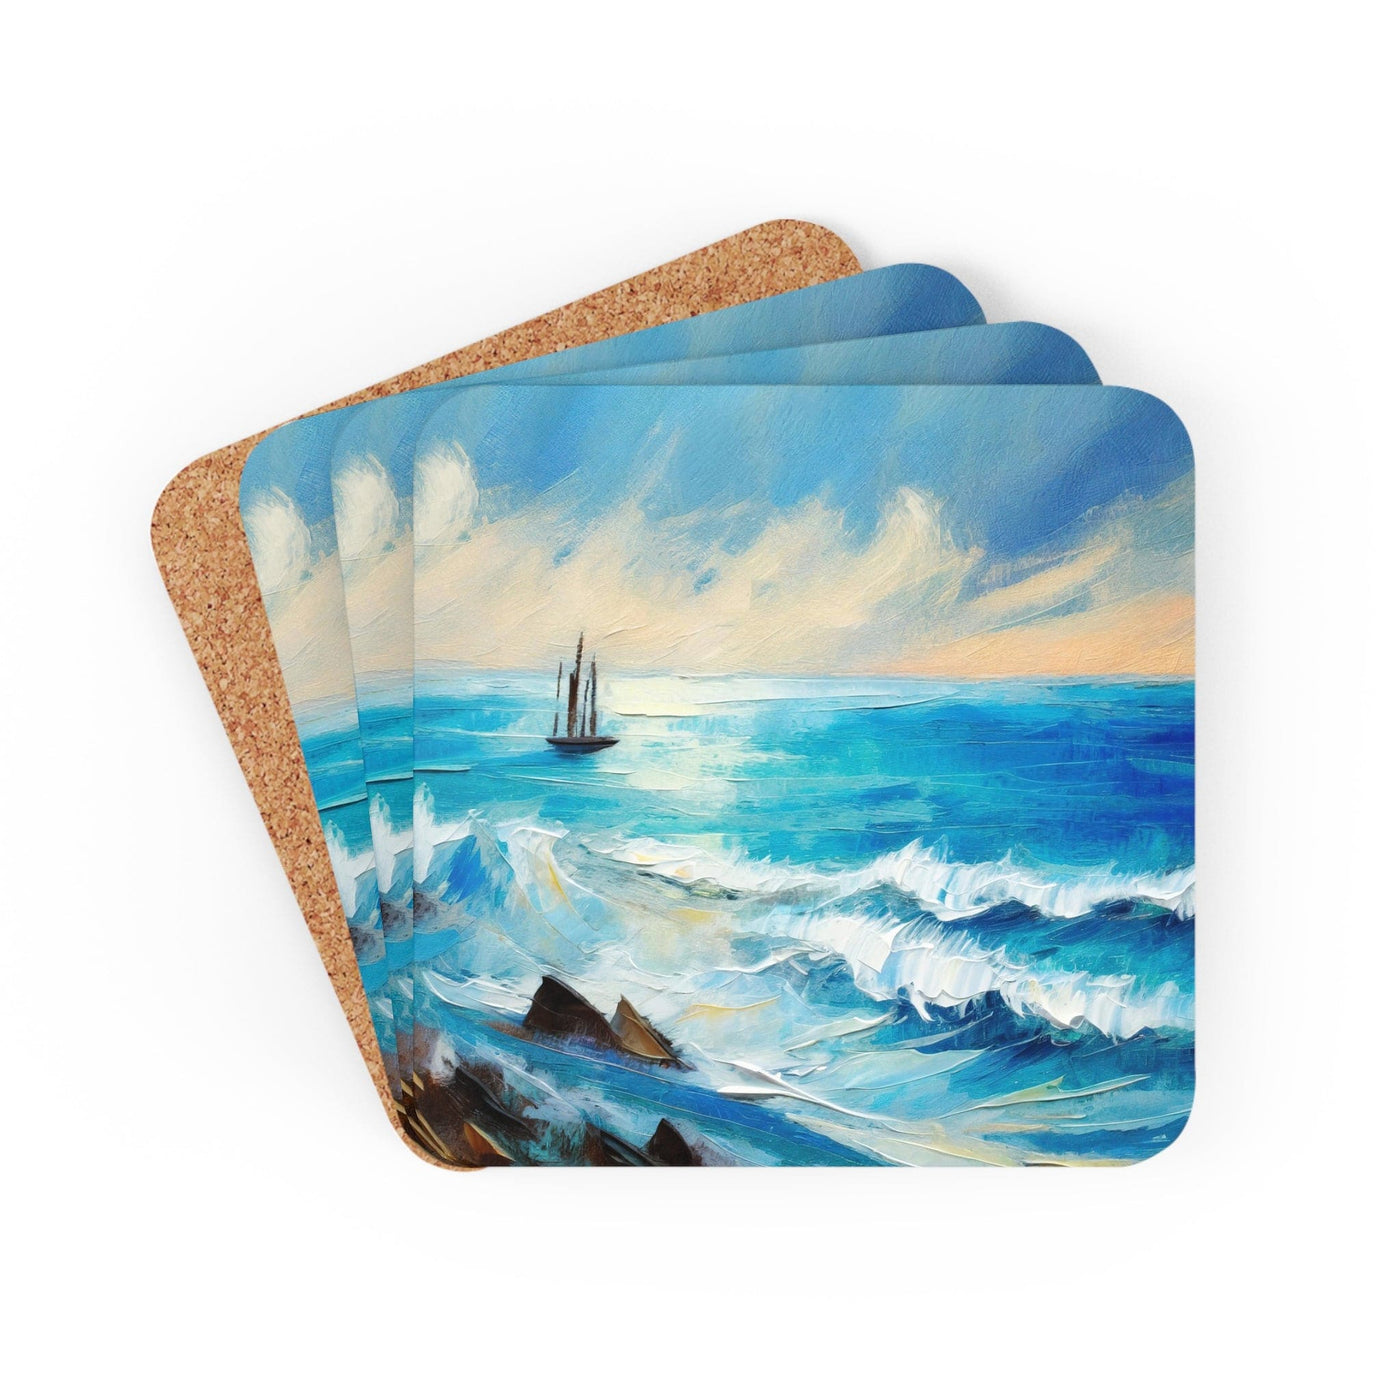 Coaster Set Of 4 For Drinks Blue Ocean Print - Decorative | Coasters